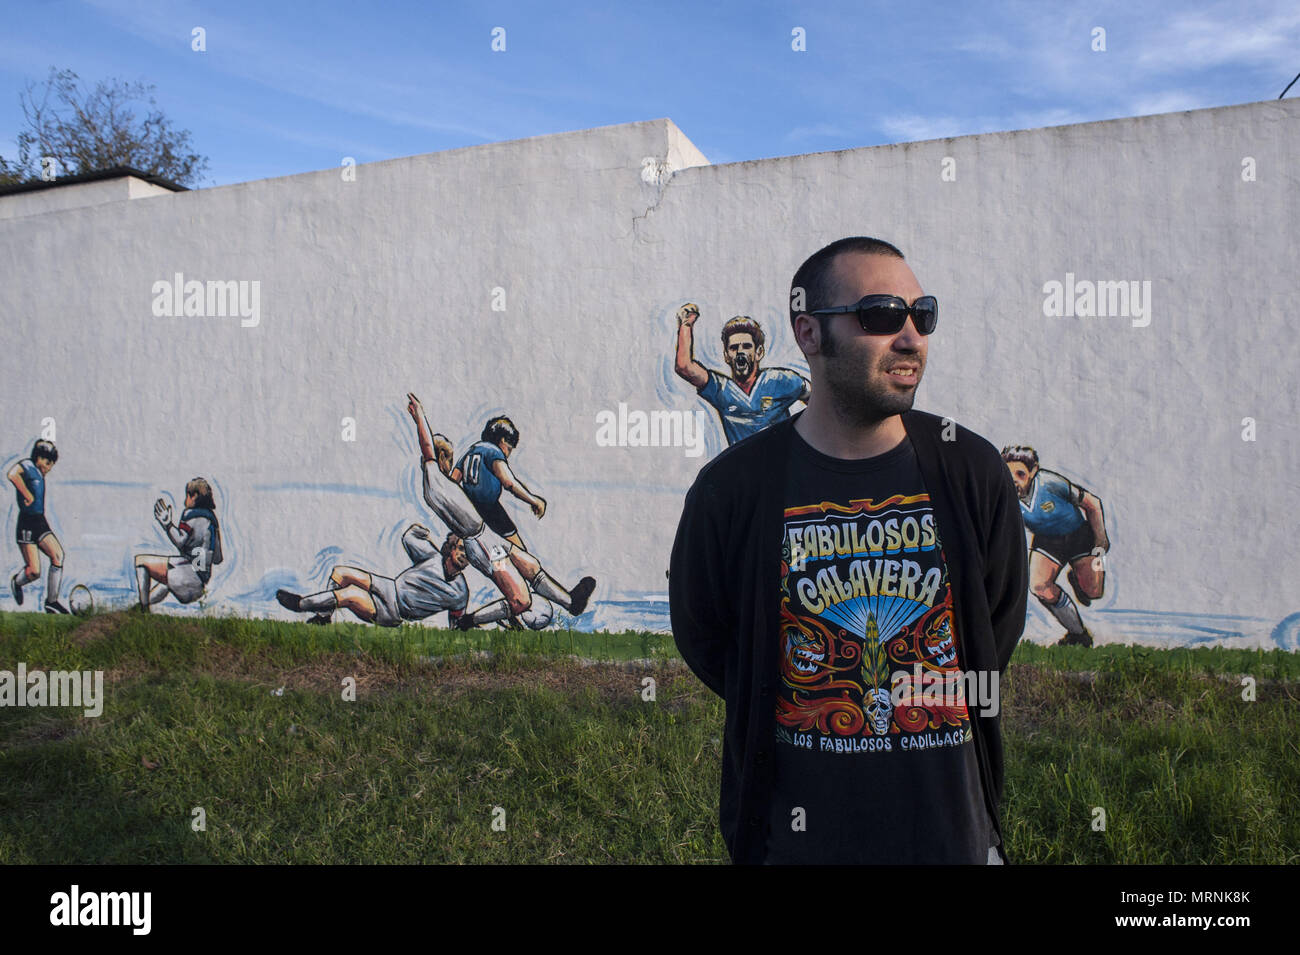 May 12, 2018 - Buenos Aires, Buenos Aires, Argentina - On a wall in a little country city, artist Ariel Bertolotti created a mural in which two symbols of different Argentinian football eras coexist: Diego Armando Maradona and Lionel Messi, the two greatest Argentinian players of all time, both considered at their own time the best of the world. The mural depicts the famous goal Maradona scored against England in 1986 Mexico World cup, a goal considered by many the best of all time, with a twist, the player celebrating the goal isn't Maradona but Messi. (Credit Image: © Patricio Murphy via ZUM Stock Photo